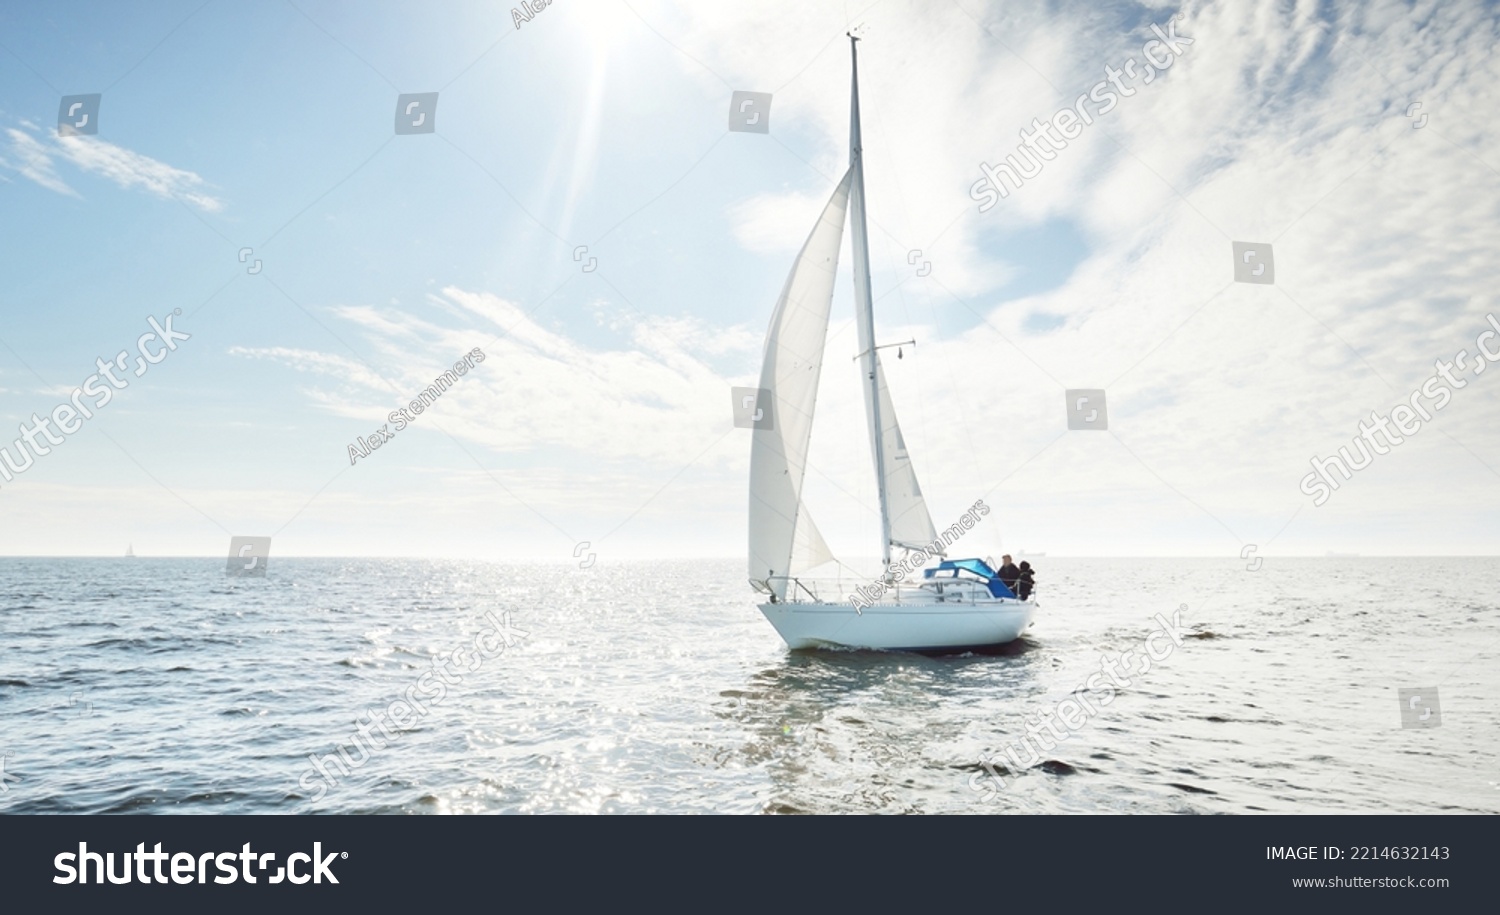 White sloop rigged yacht sailing in an open sea. Clear sky, cloudscape. A view from the sailboat. Transportation, travel, sport, recreation, leisure activity, racing, regatta. Panorama, copy space #2214632143